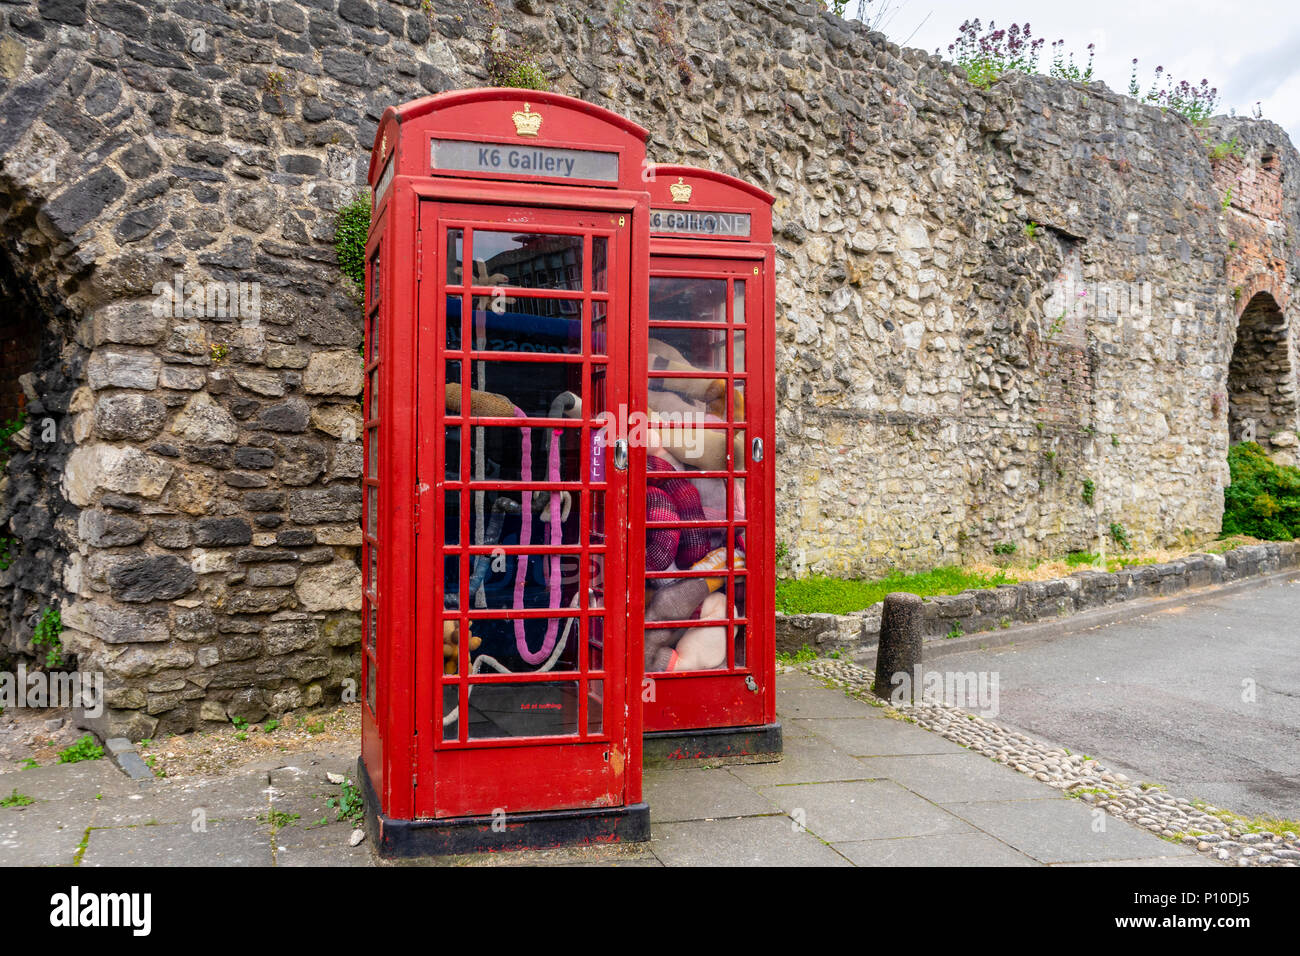 'Stuffed' exhibition at the K6 Gallery in Southampton which is on display in two Grade II listed red telephone boxes, Southampton, England, UK Stock Photo